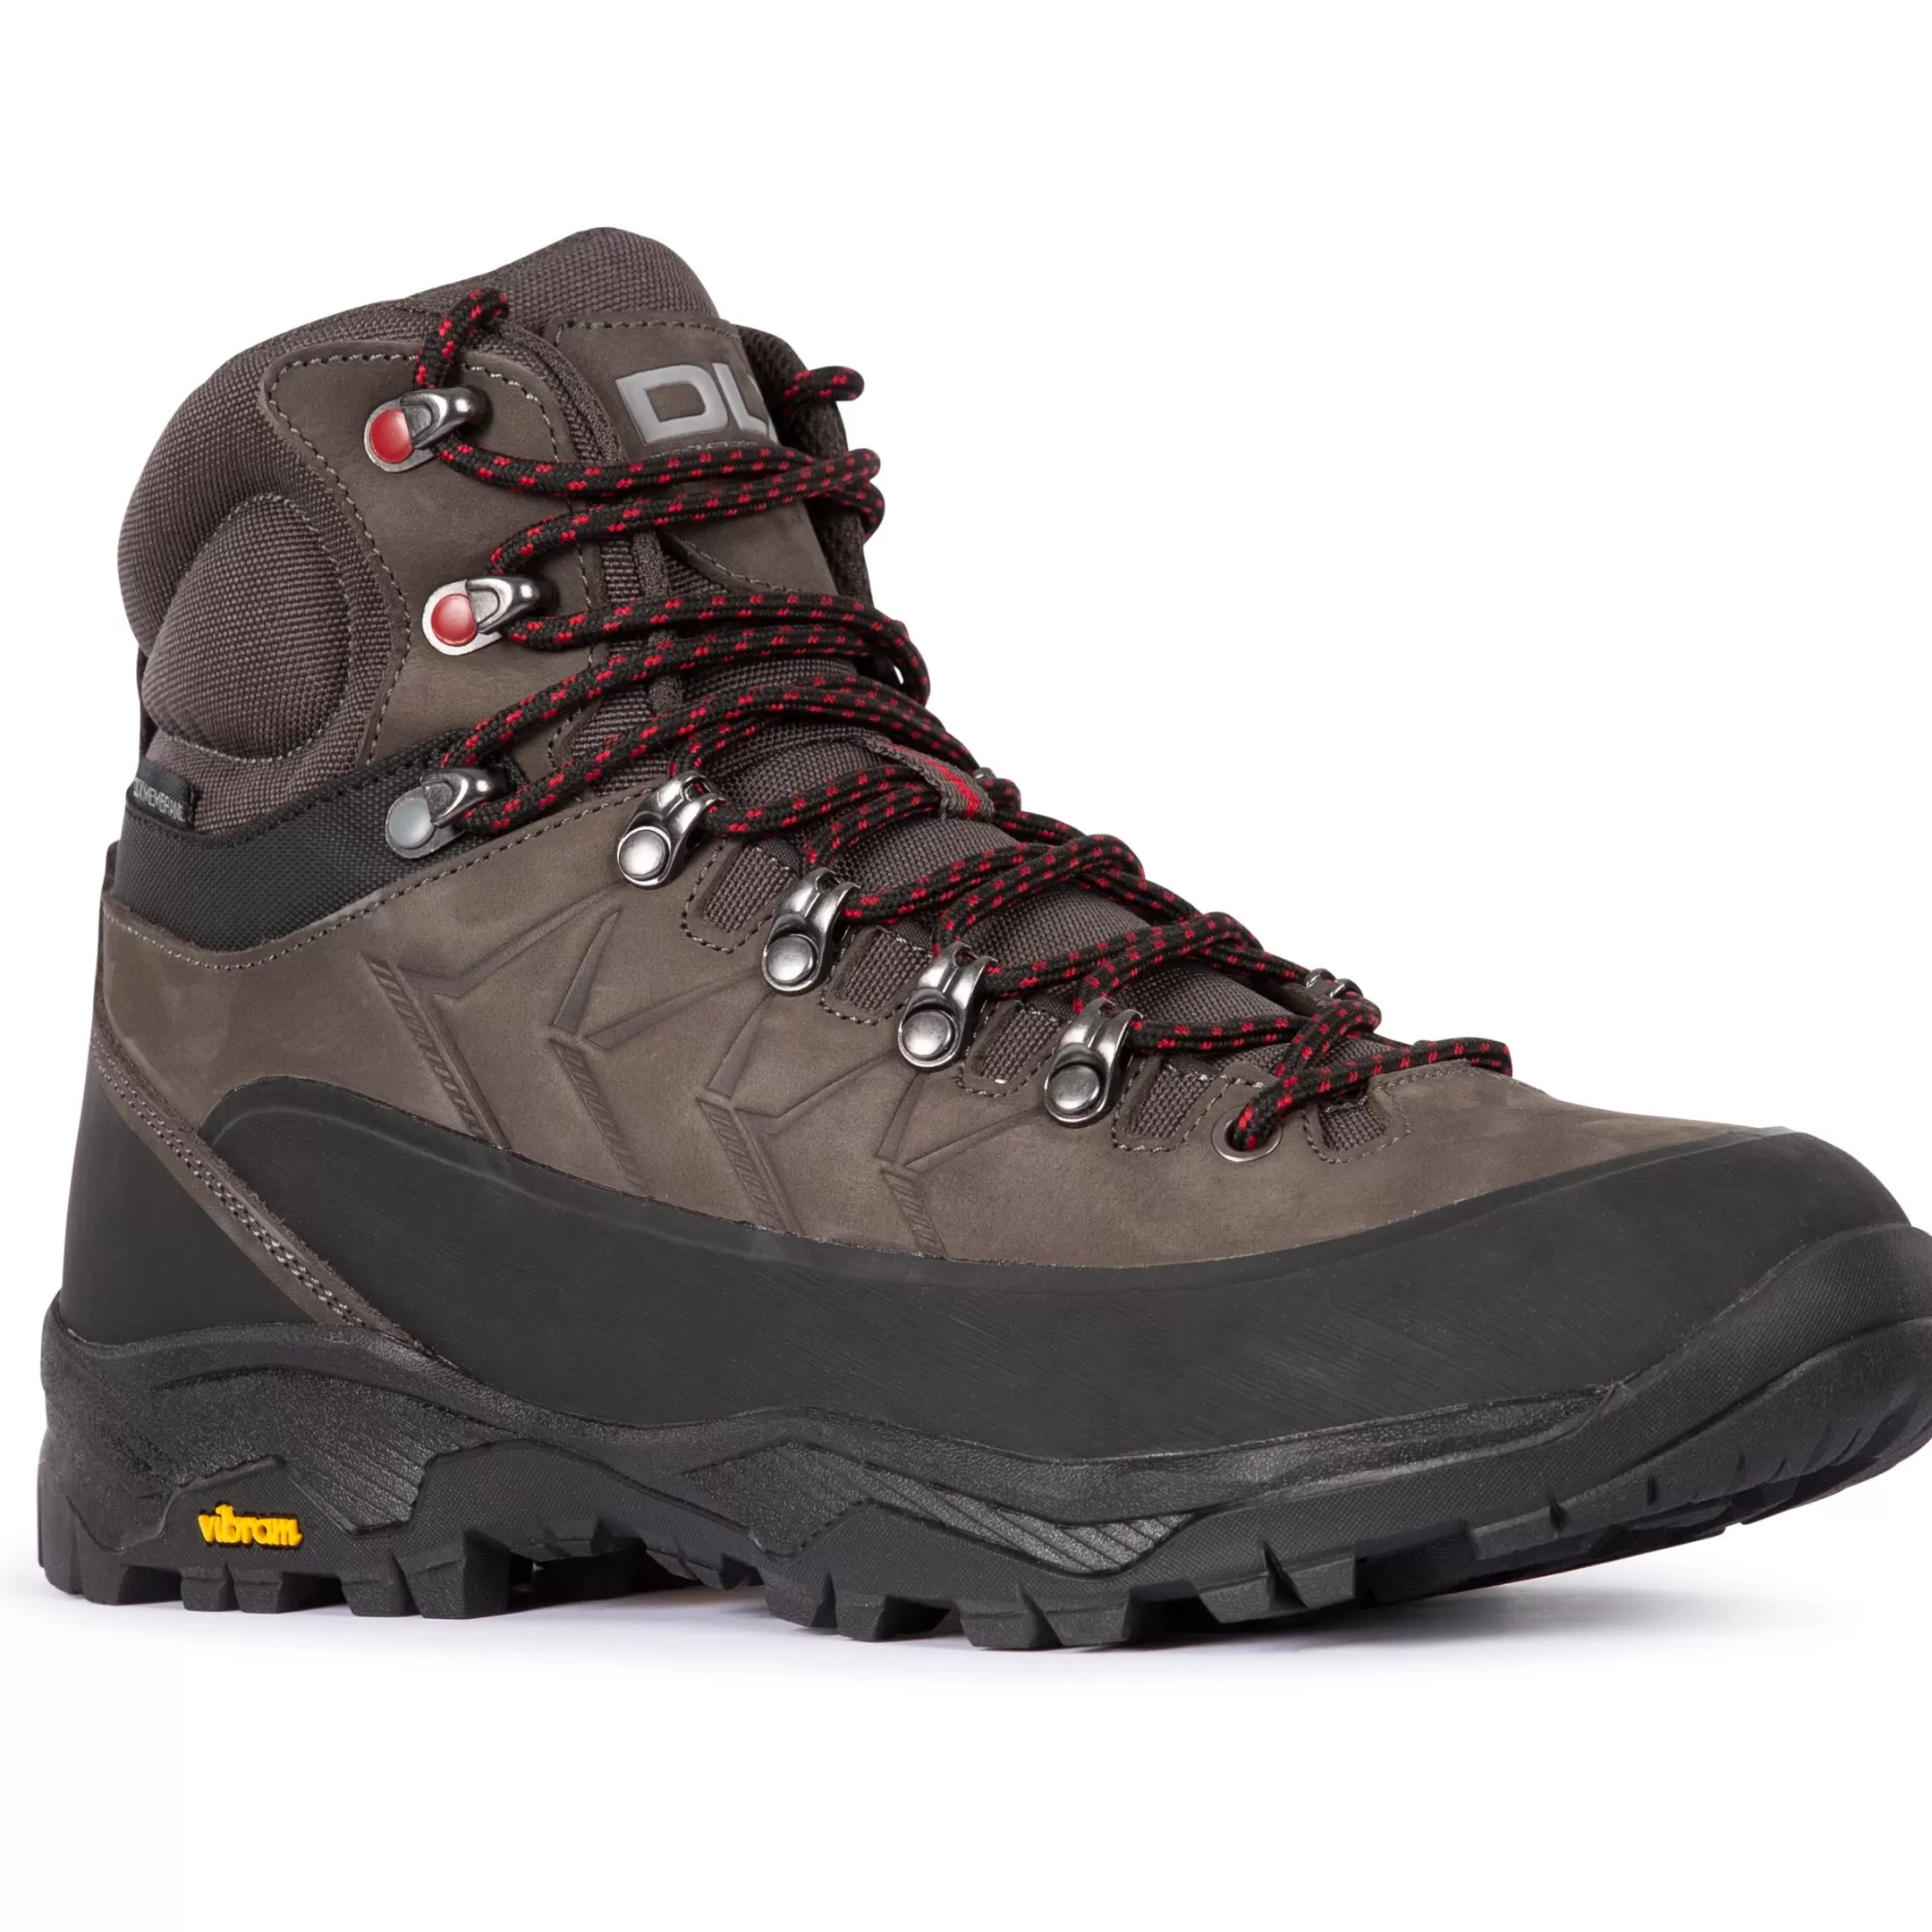 DLX MALE HIKING BOOT BRODY | Trespass Hot